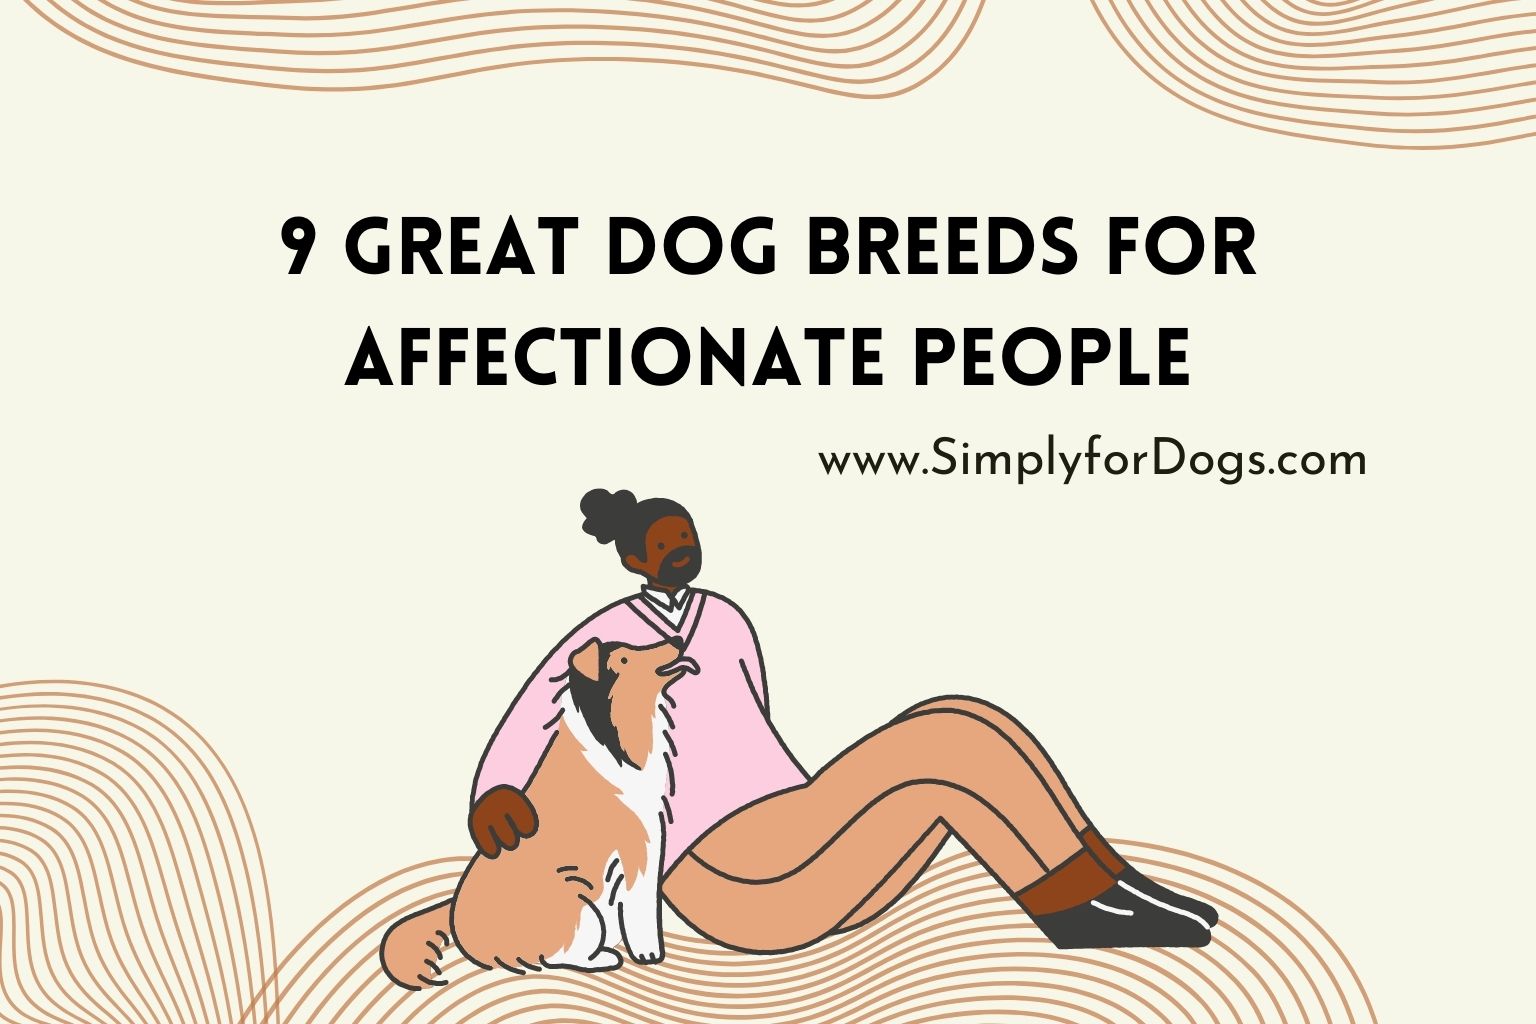 9 Great Dog Breeds for Affectionate People